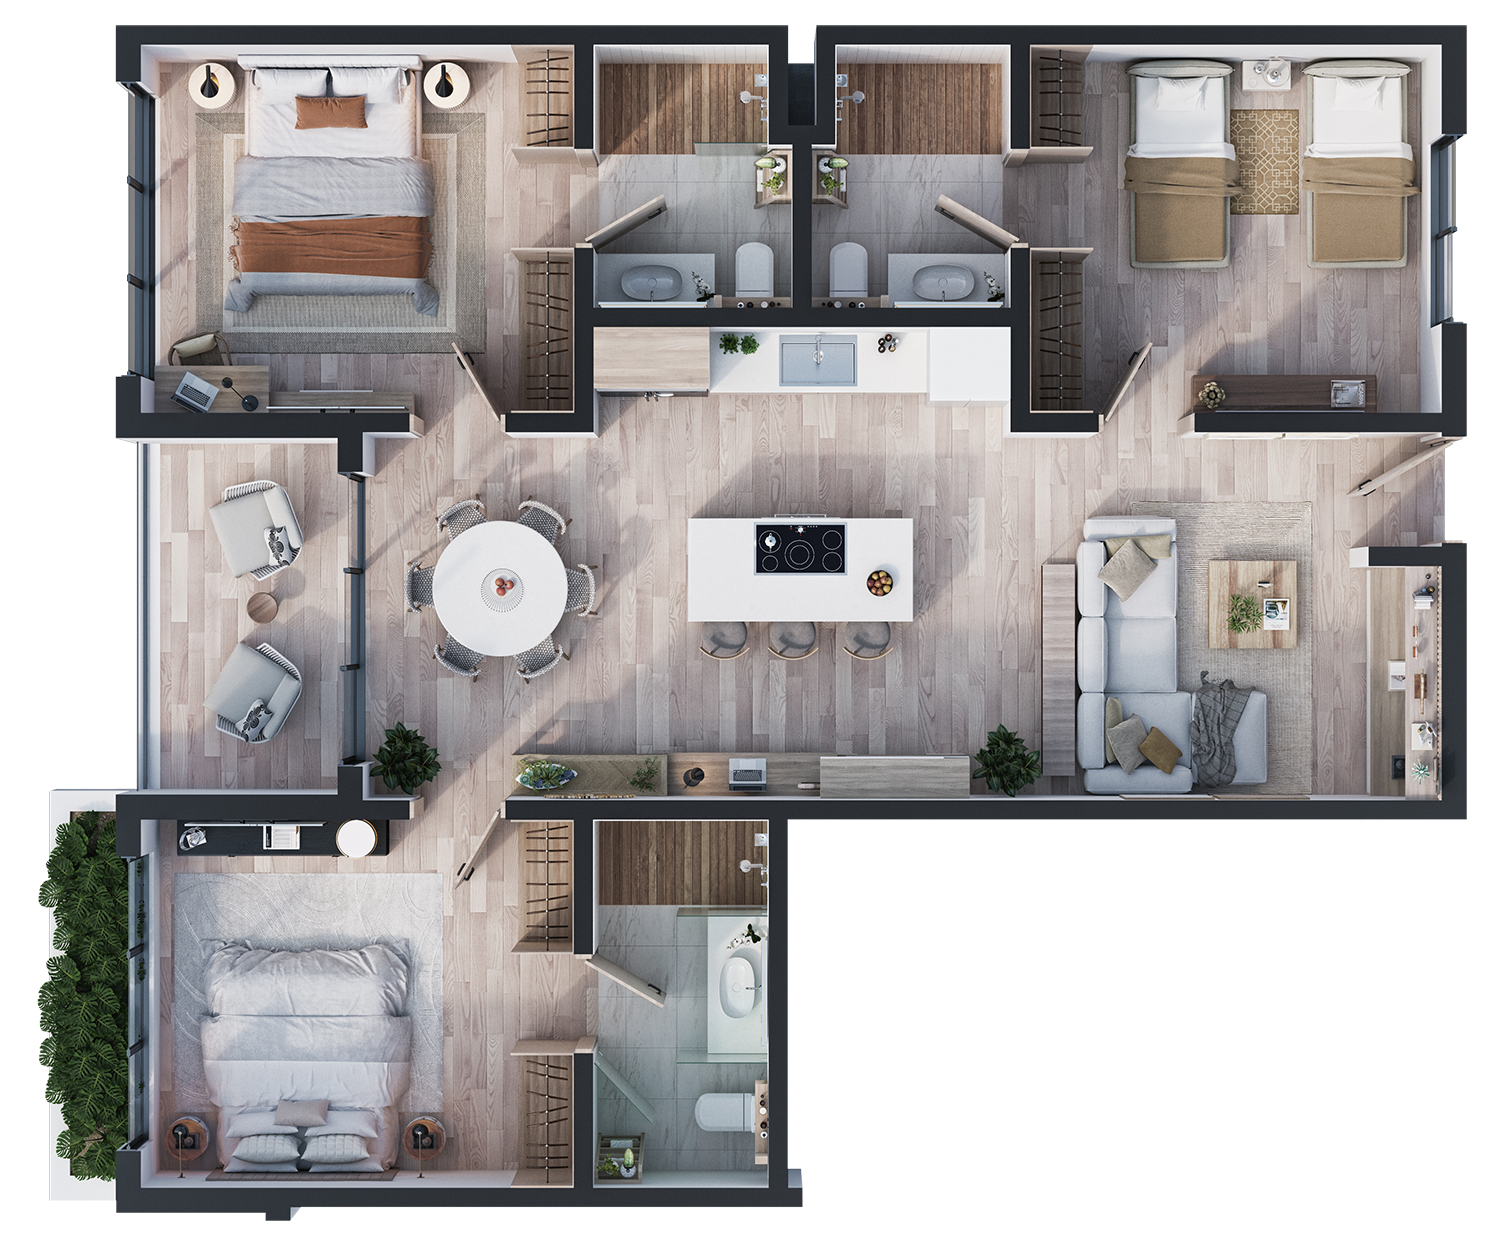 Expansive 3-bedroom apartment layout in Punta Cana with 118 square meters, featuring 3 bathrooms, stylish living areas, and modern kitchen. Perfect for families or as a luxurious retreat.